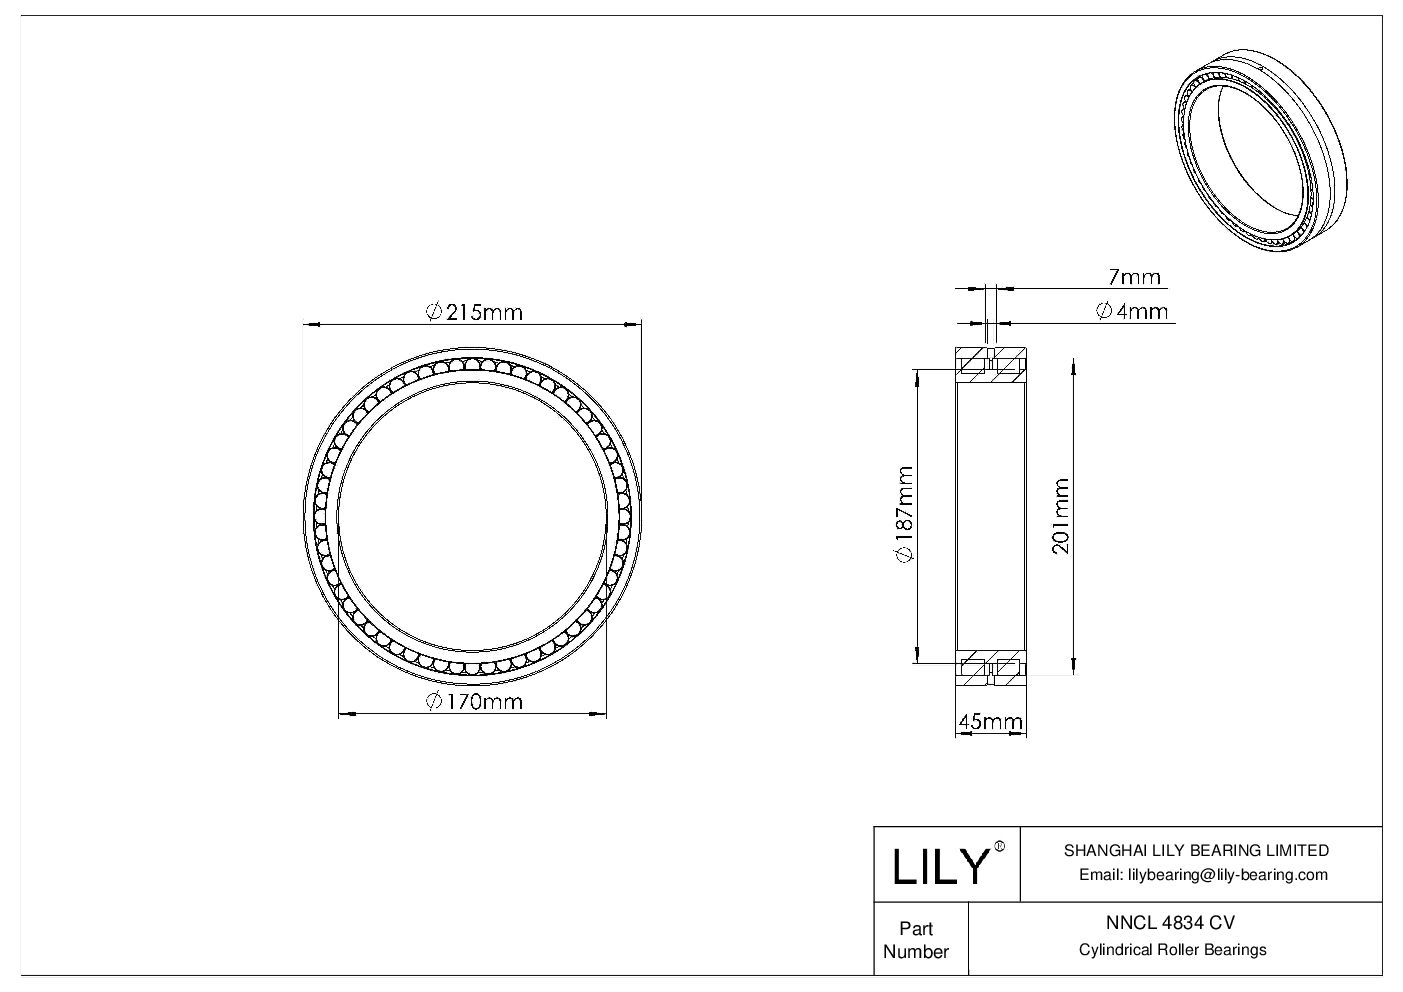 NNCL 4834 CV Double Row Full Complement Cylindrical Roller Bearings cad drawing